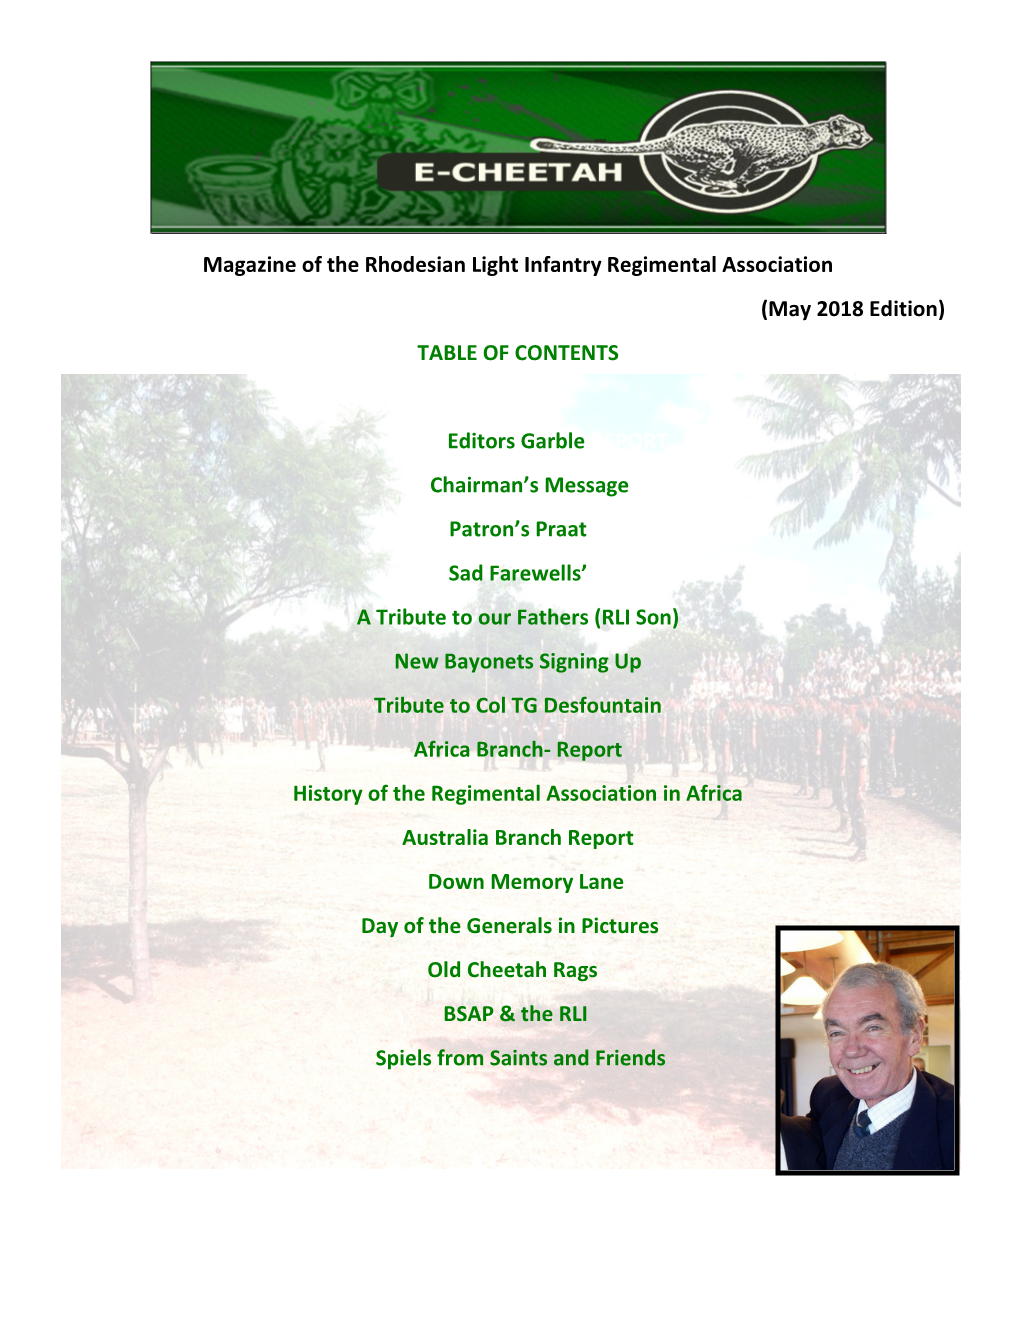 Magazine of the Rhodesian Light Infantry Regimental Association (May 2018 Edition) TABLE of CONTENTS Editors Garble REPORT Rlcha